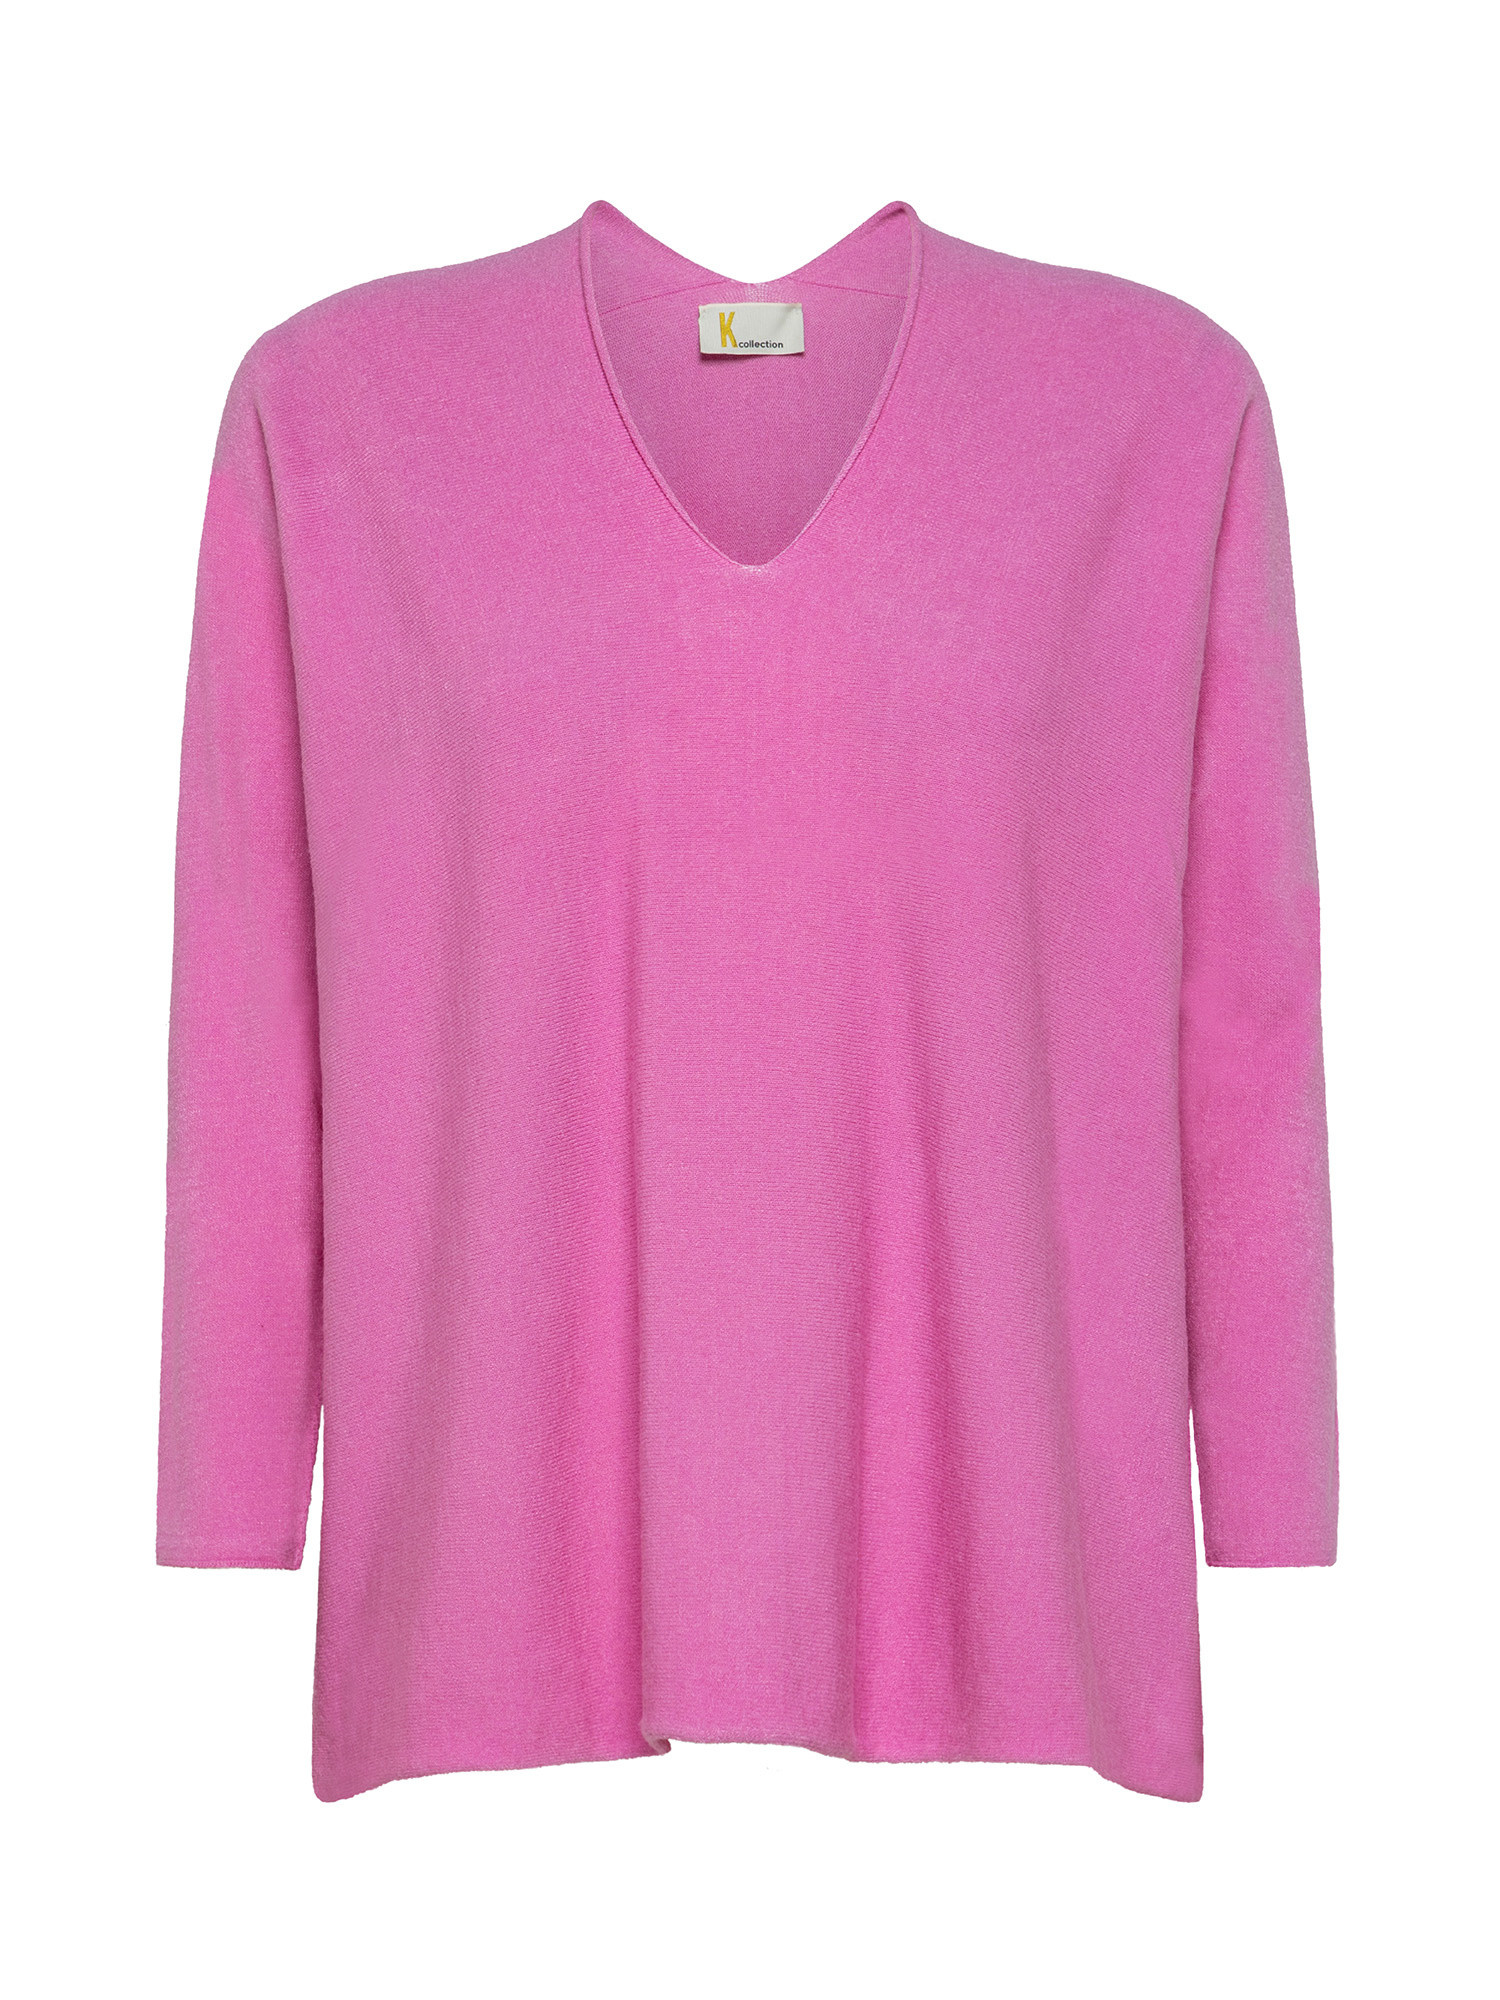 K Collection - Pullover, Rosa fuxia, large image number 0